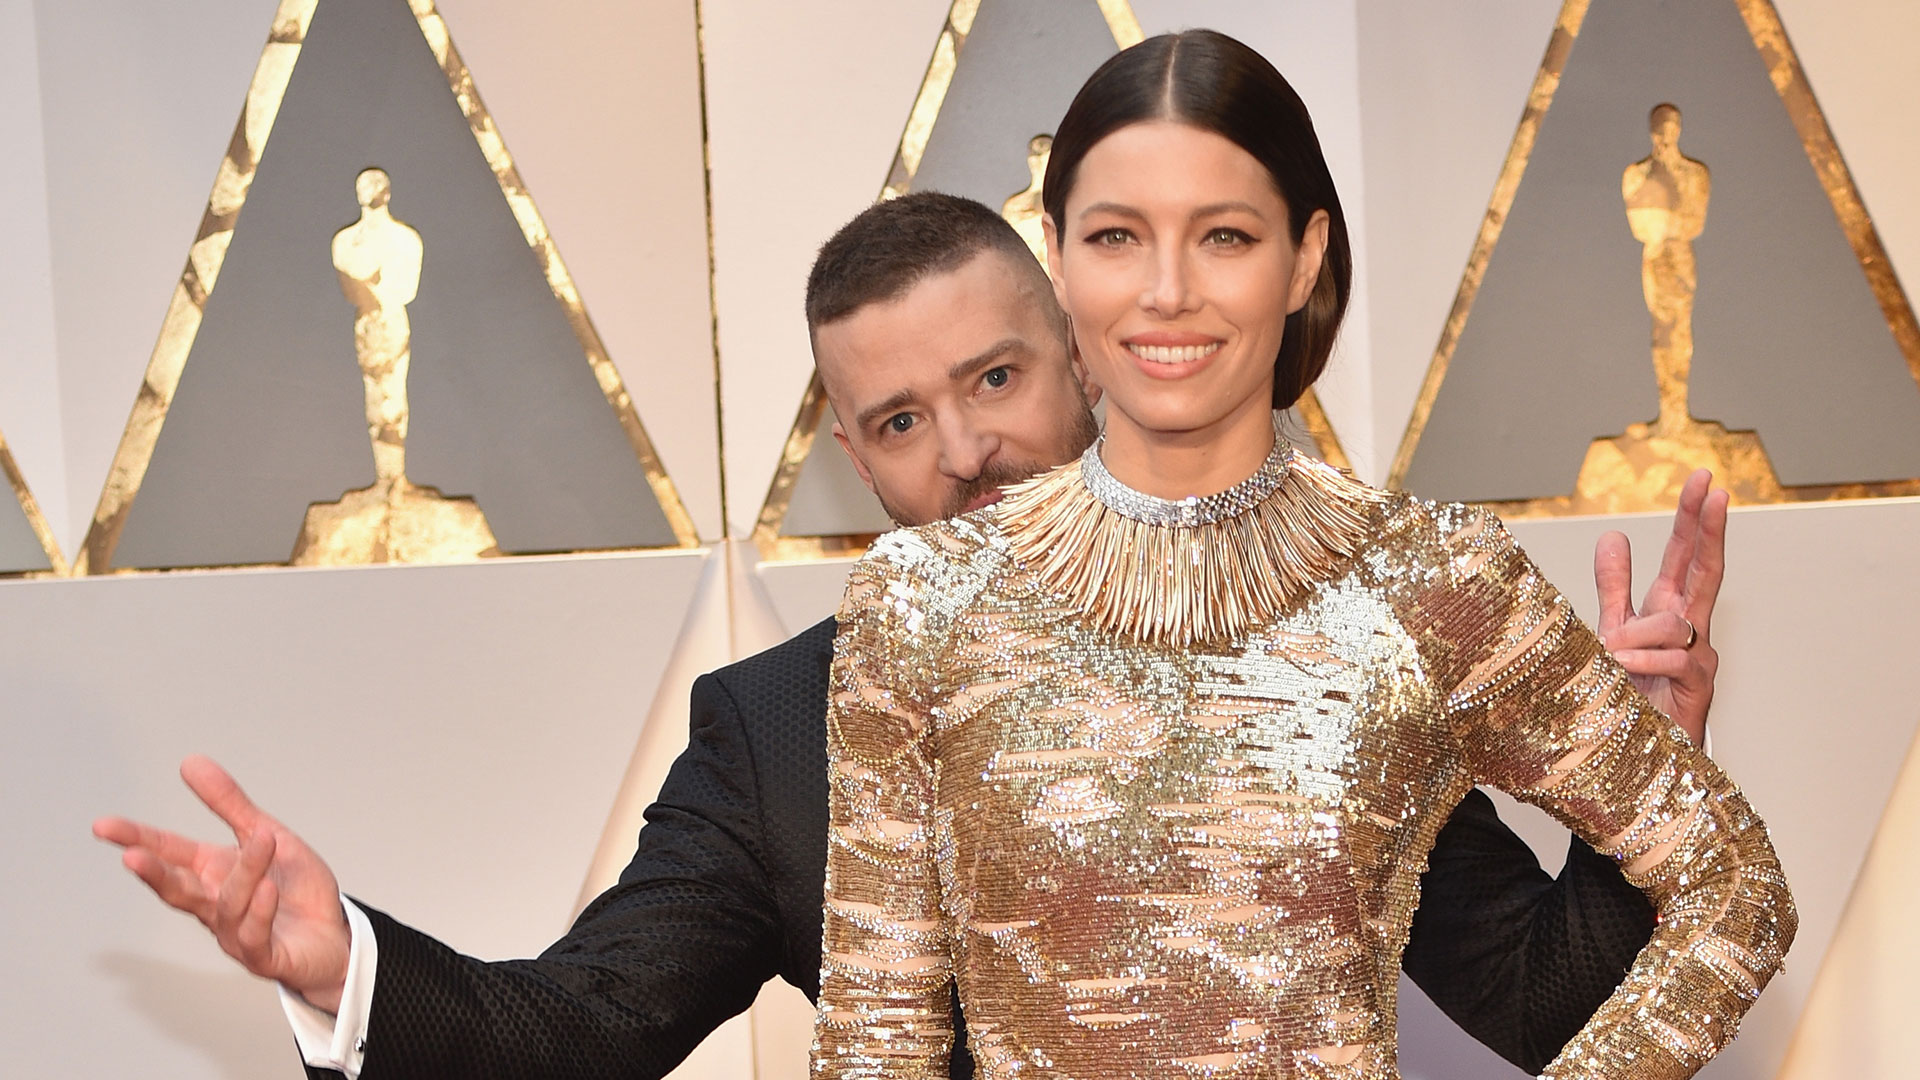 Jessica Biel Opens Up About Parenting Amid the Pandemic With Husband Justin  Timberlake: Photo 4588236, Jessica Biel, Justin Timberlake Photos